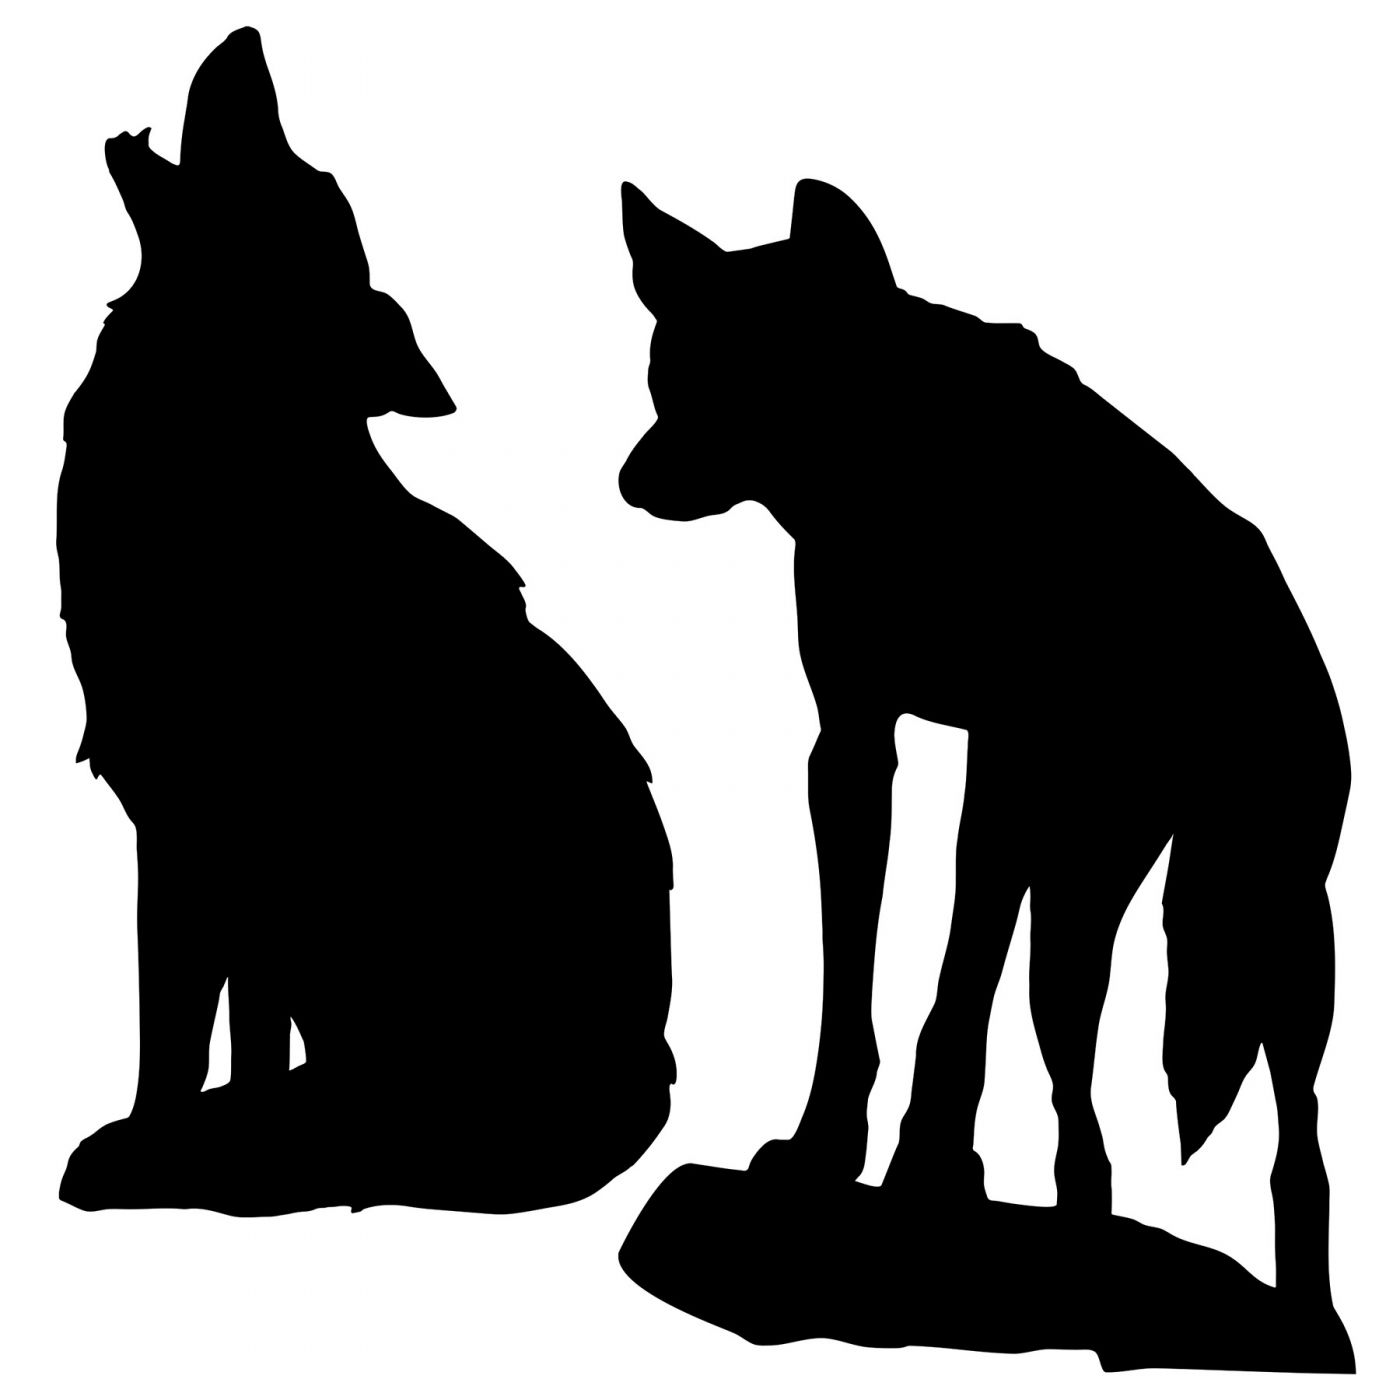 Coyote Silhouettes (12) image